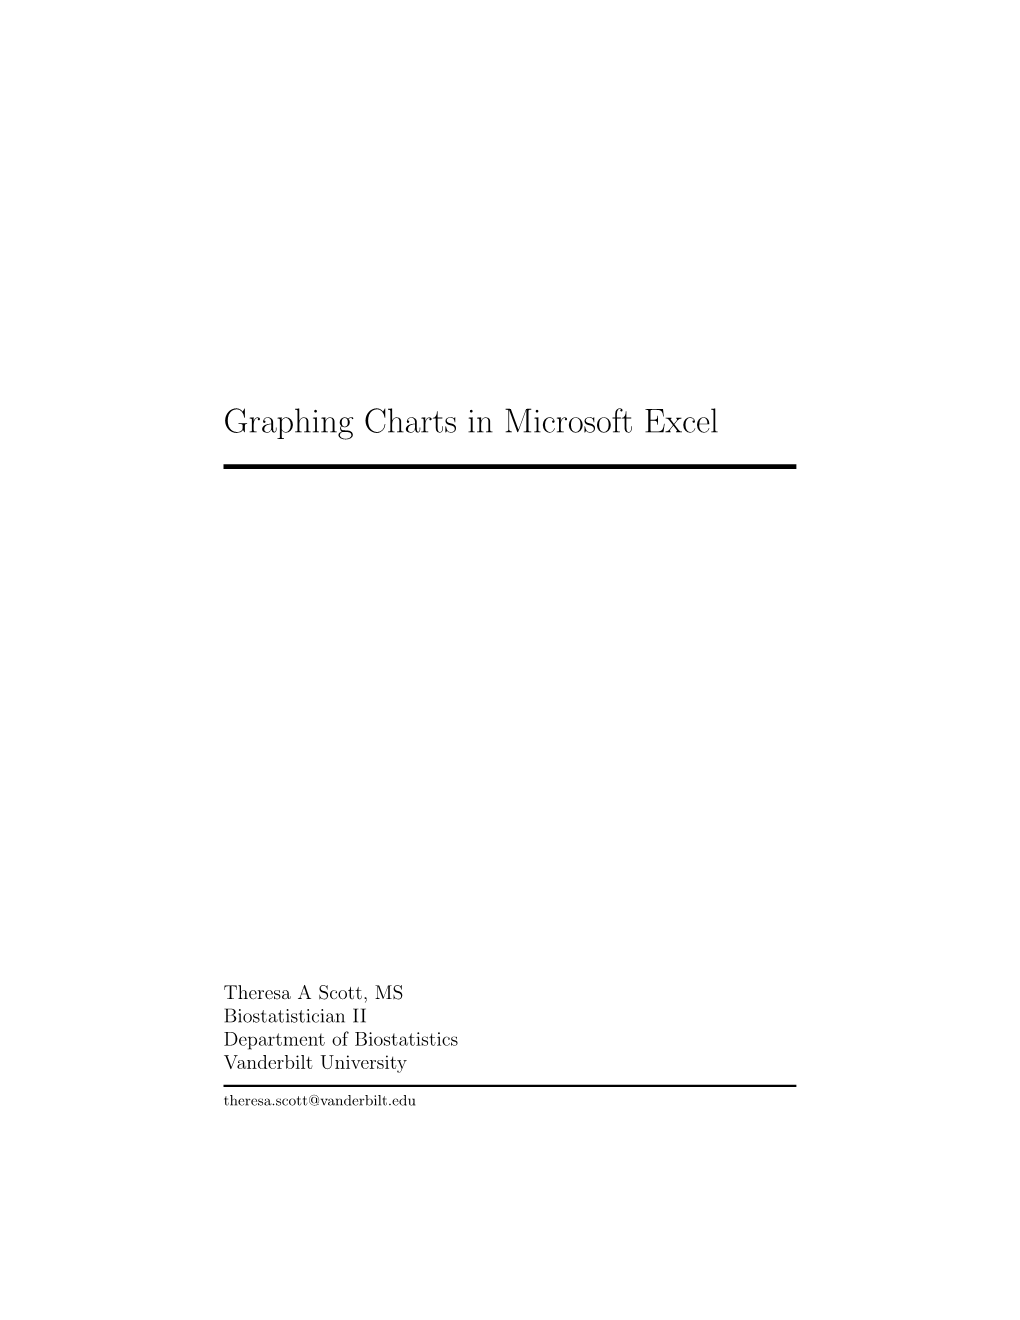 Graphing Charts in Microsoft Excel